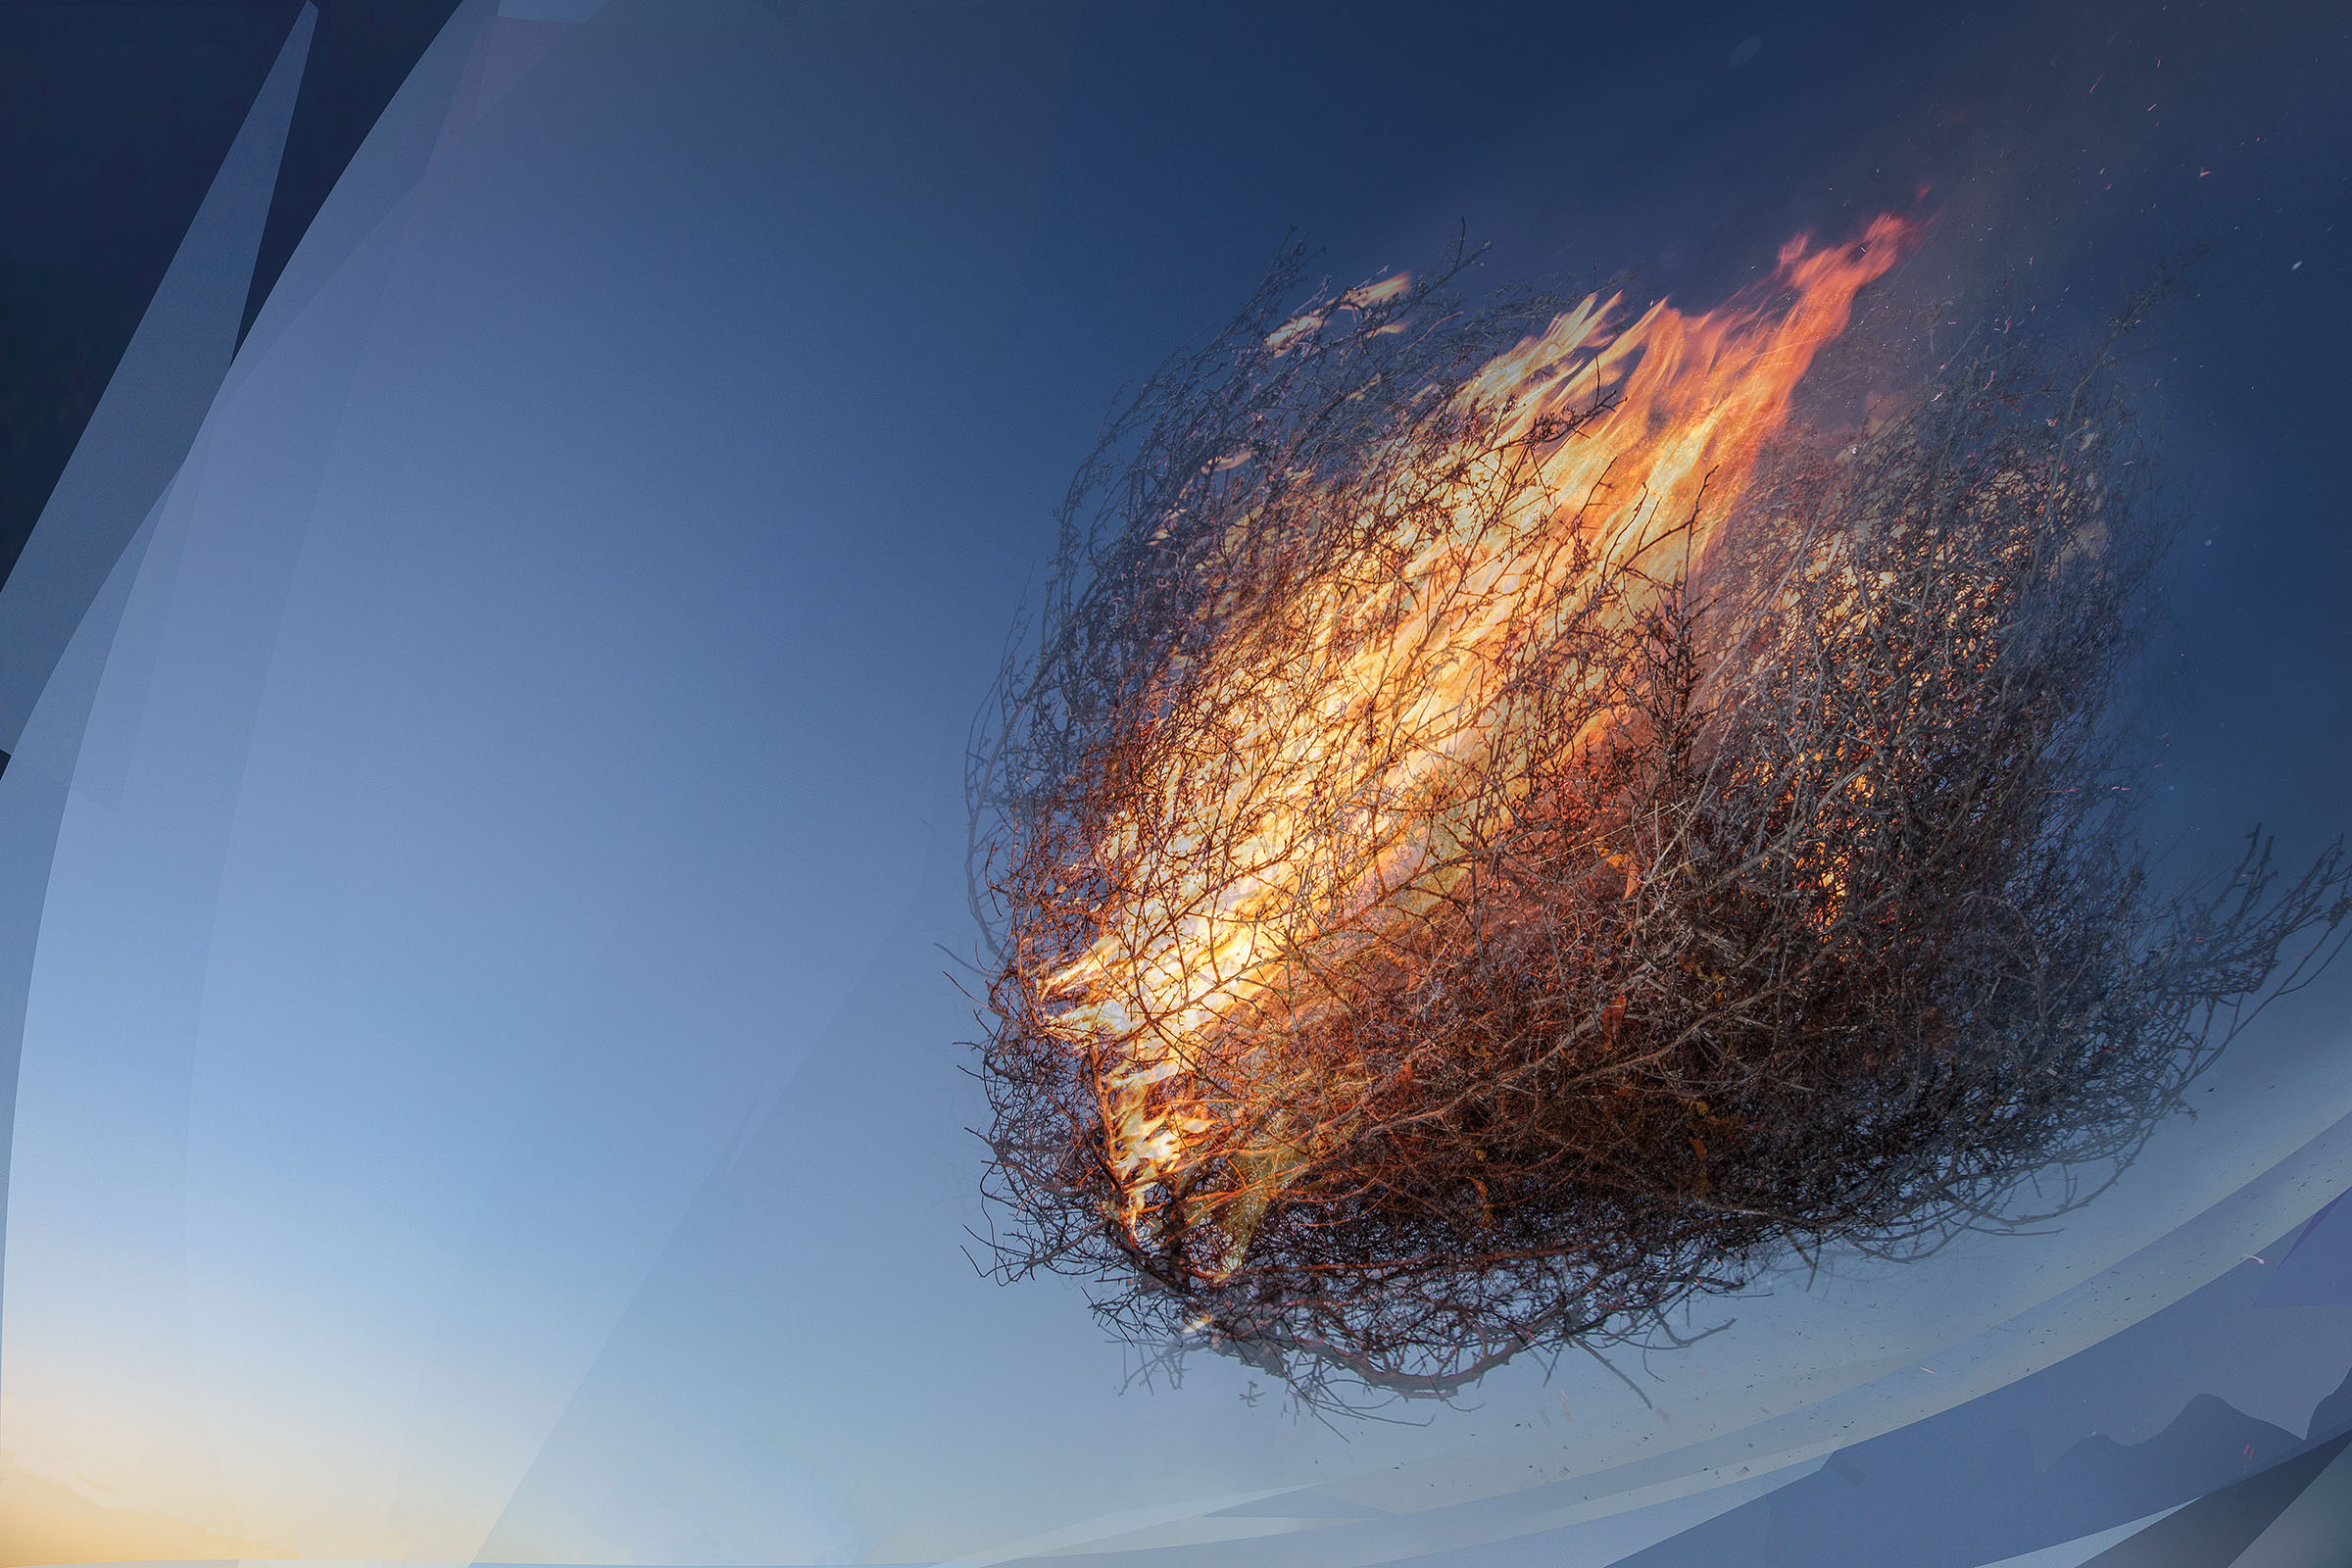 An image of a burning tumbleweed flying through the air on a dark blue night sky